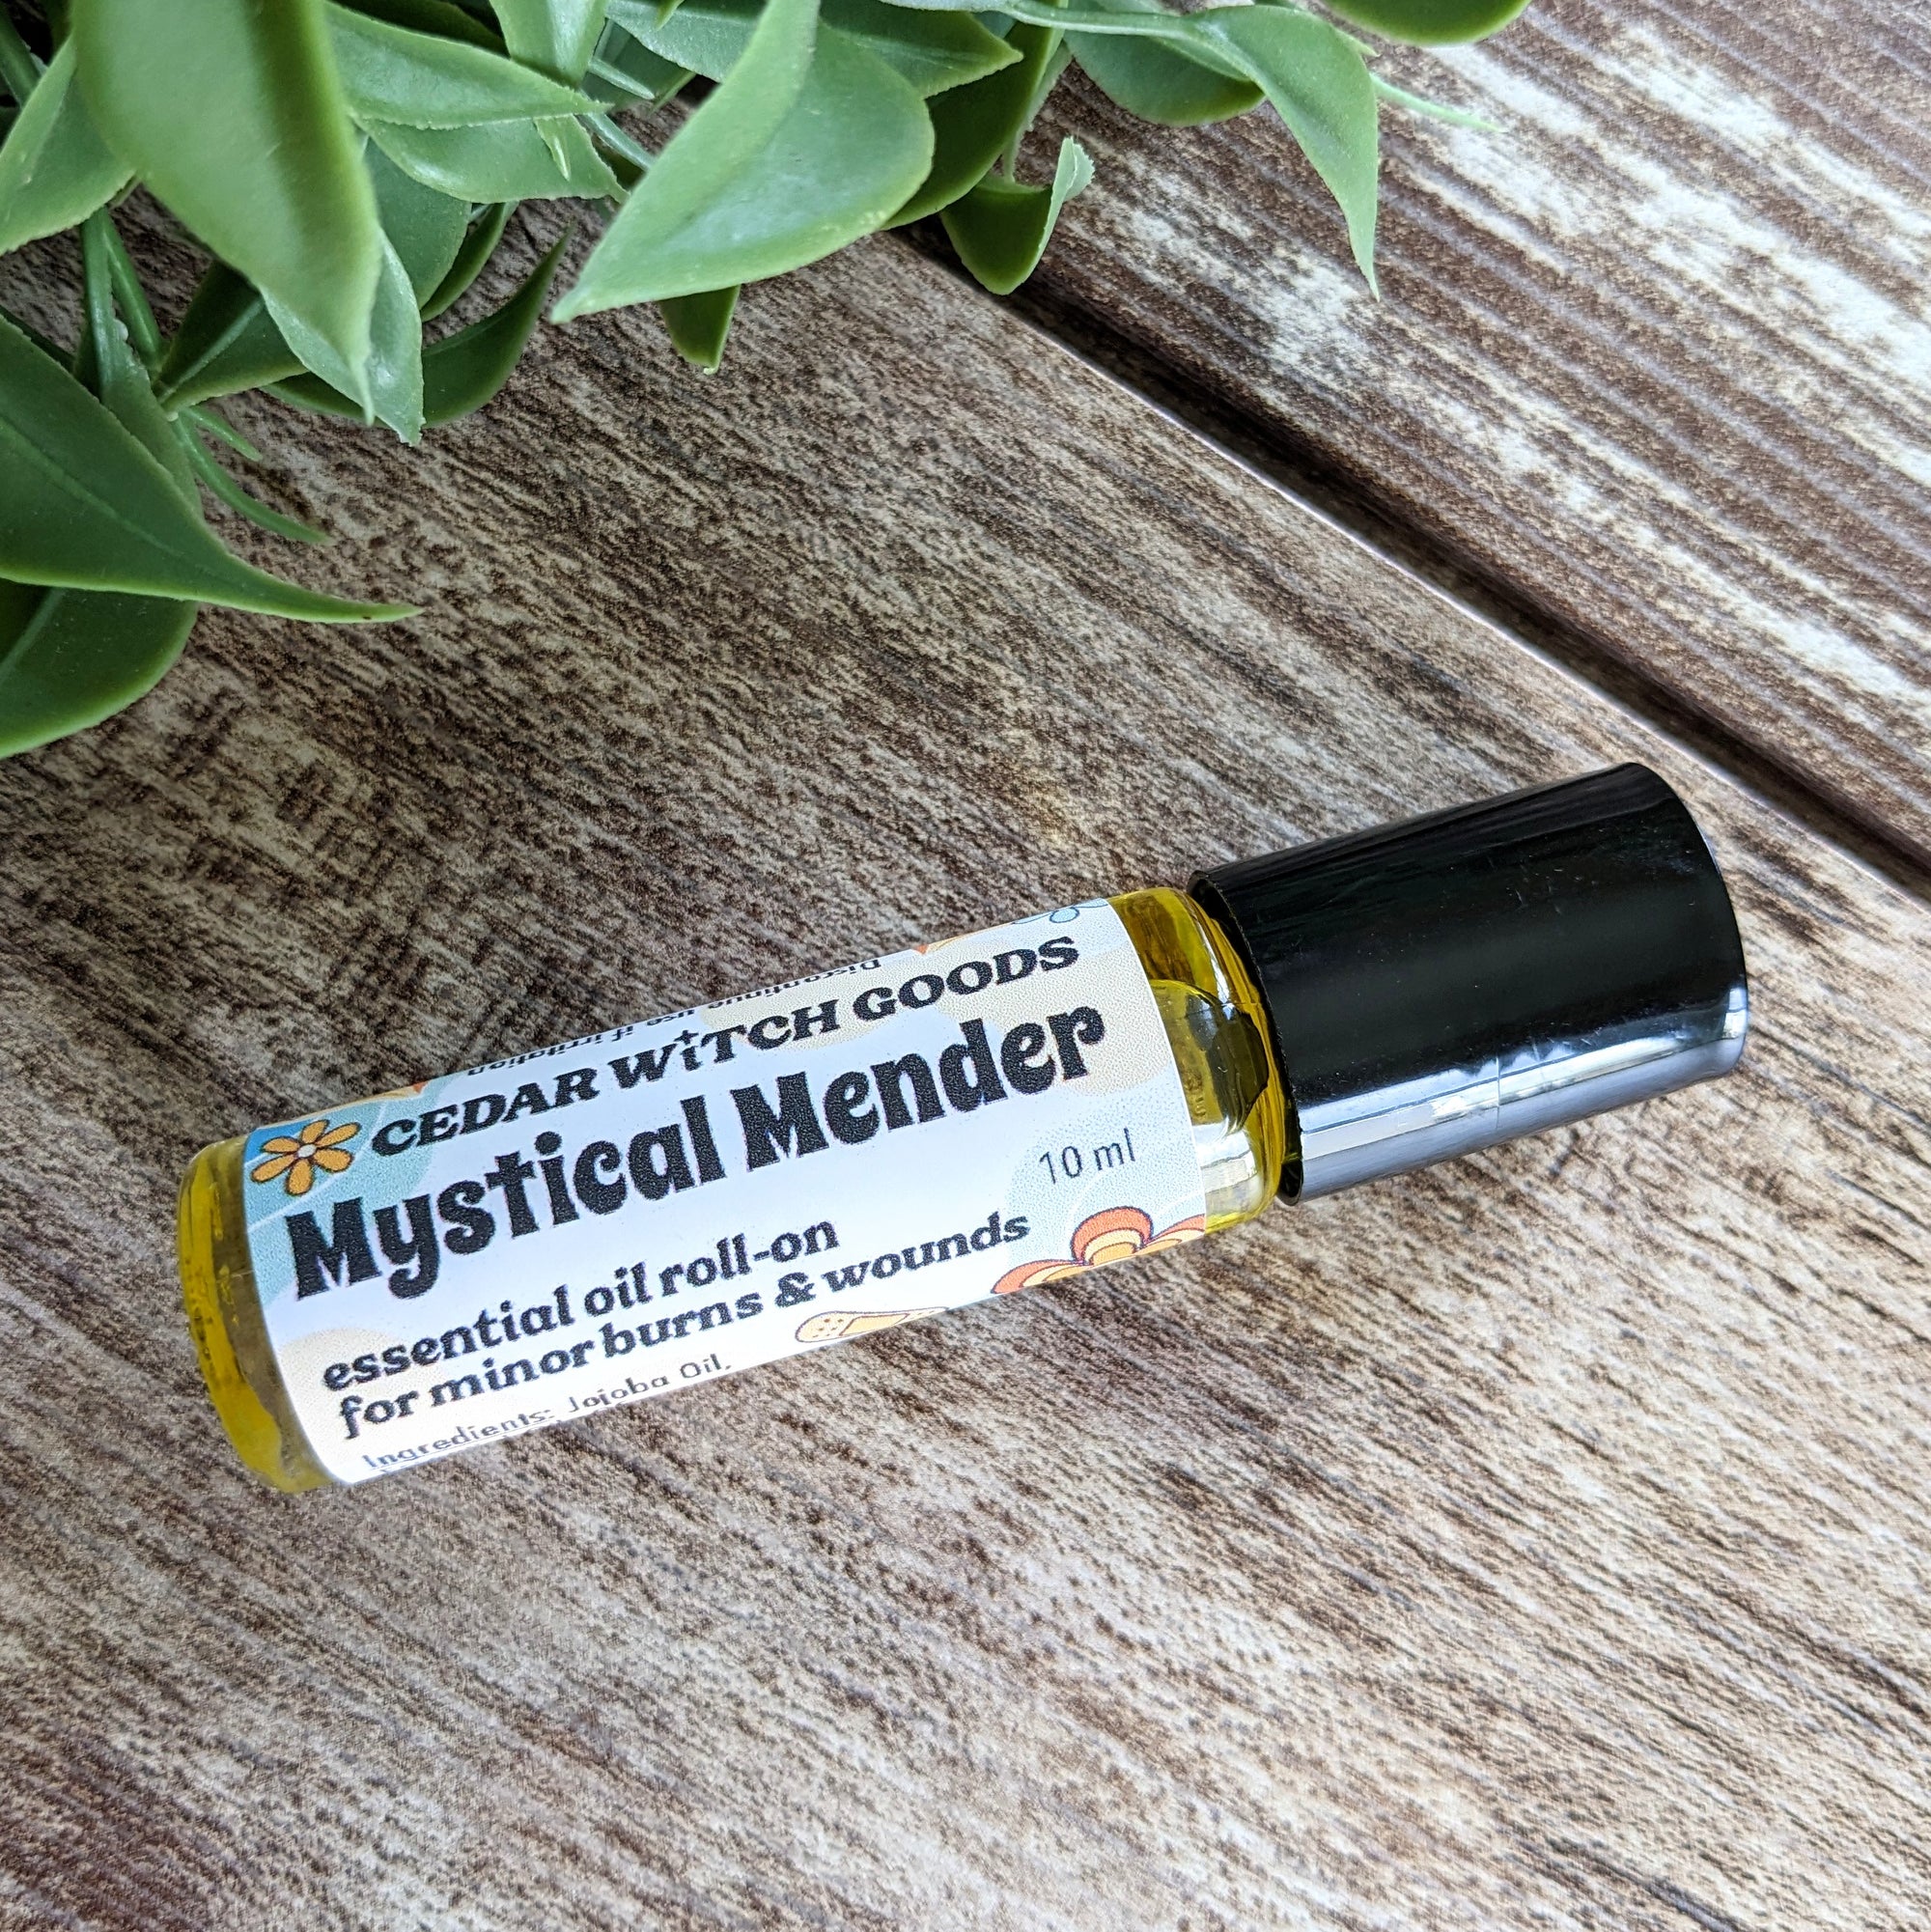 Mystical Mender Essential Oil Roll On for Minor Cuts & Burns